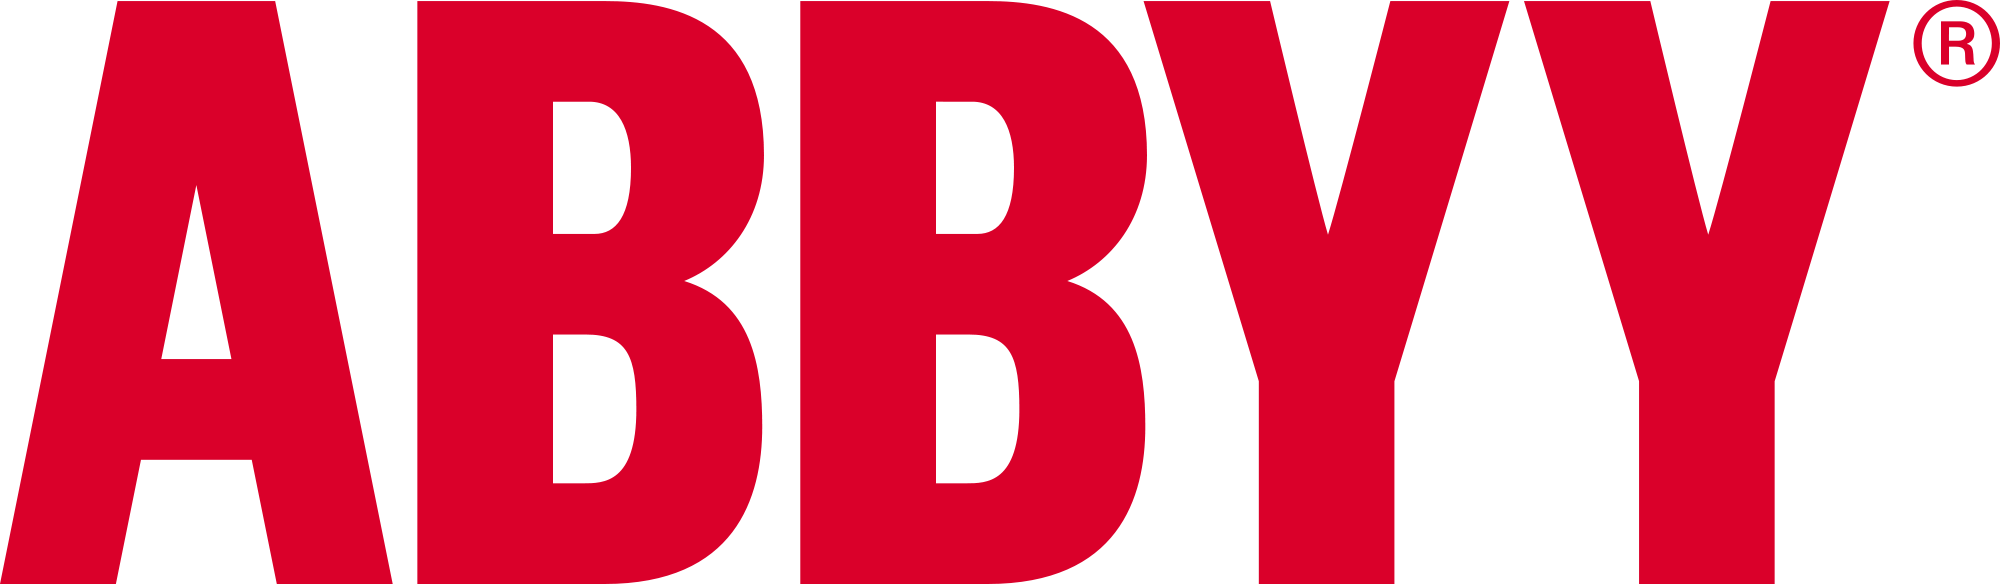 ABBYY Introduces New Way in Document Classification